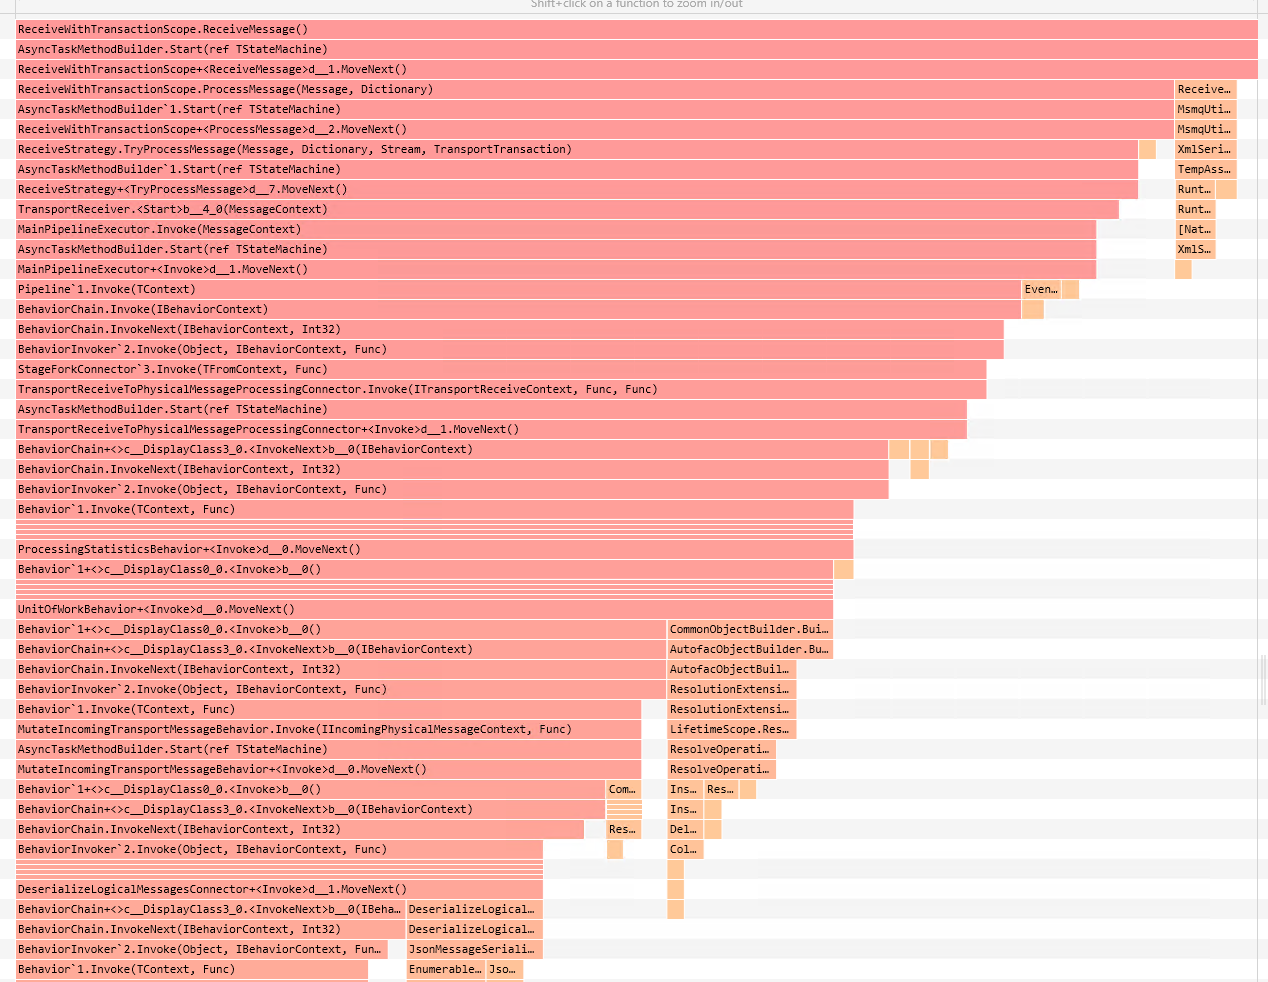 PipelineV6ReceiveCpuOverviewFlamegraph.png